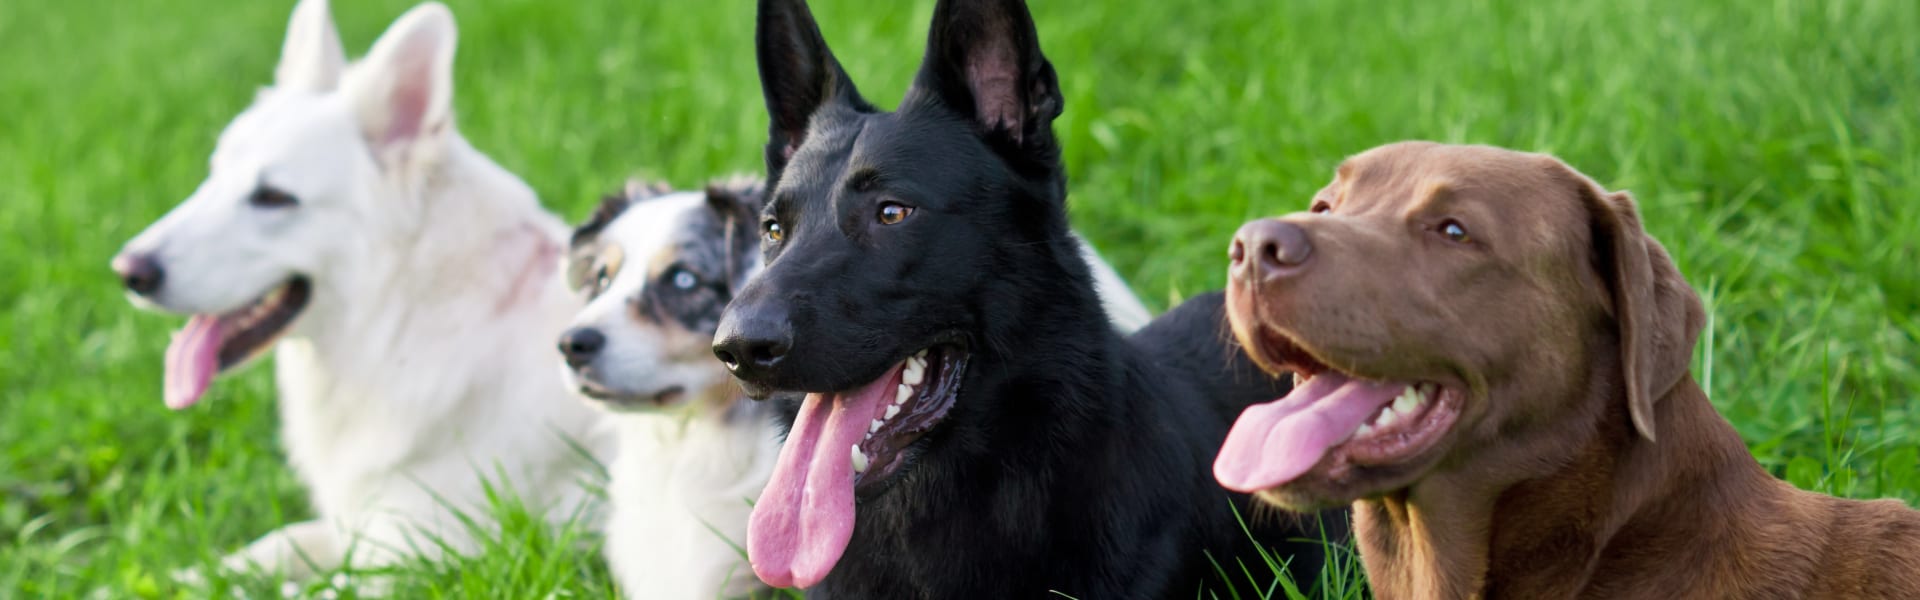 Dogs lying in grass - Positive reinforcement dog training